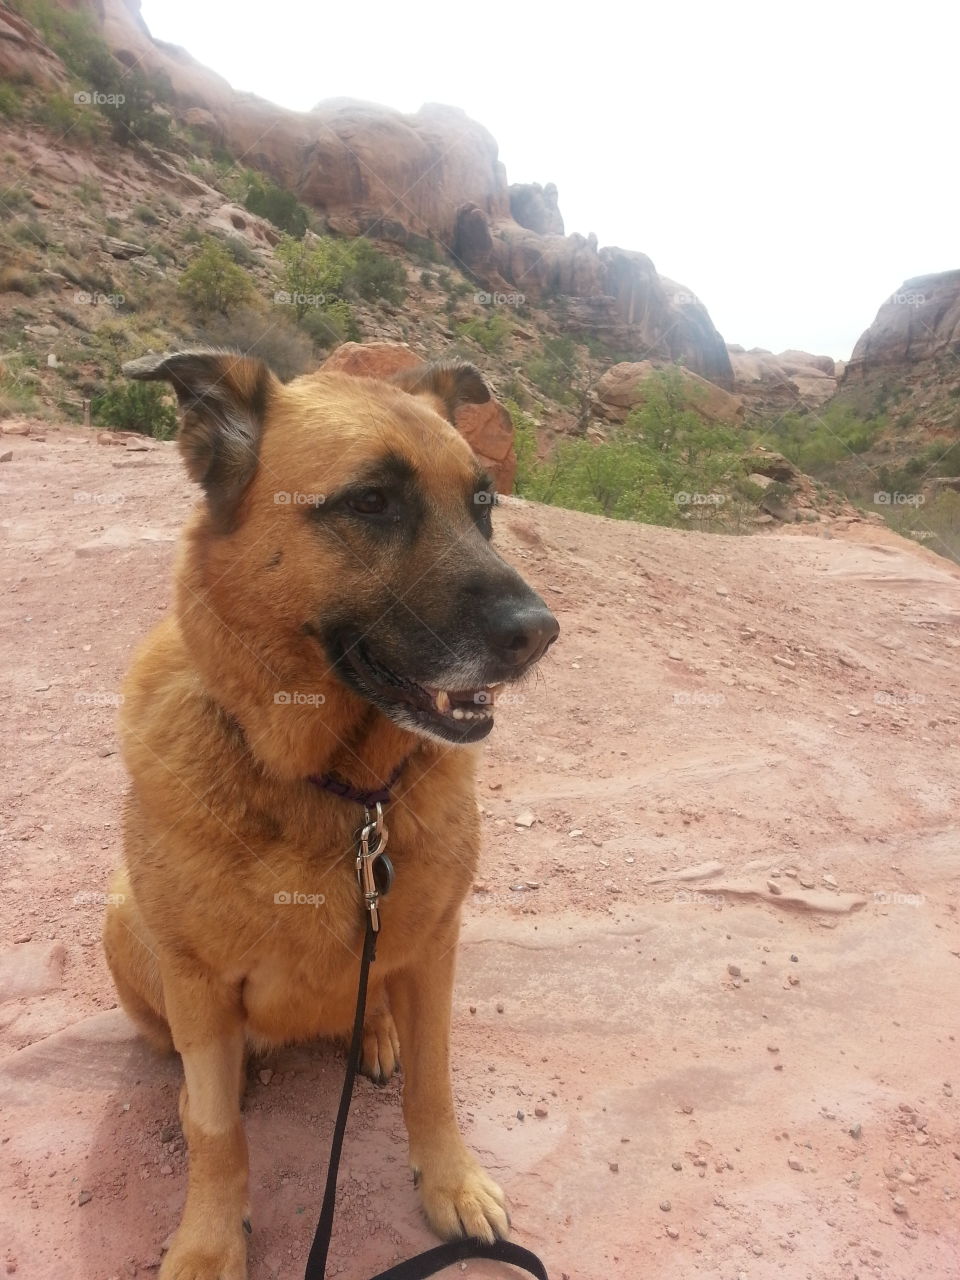 Hiking Buddy . Jules outside of Arches Natl Park